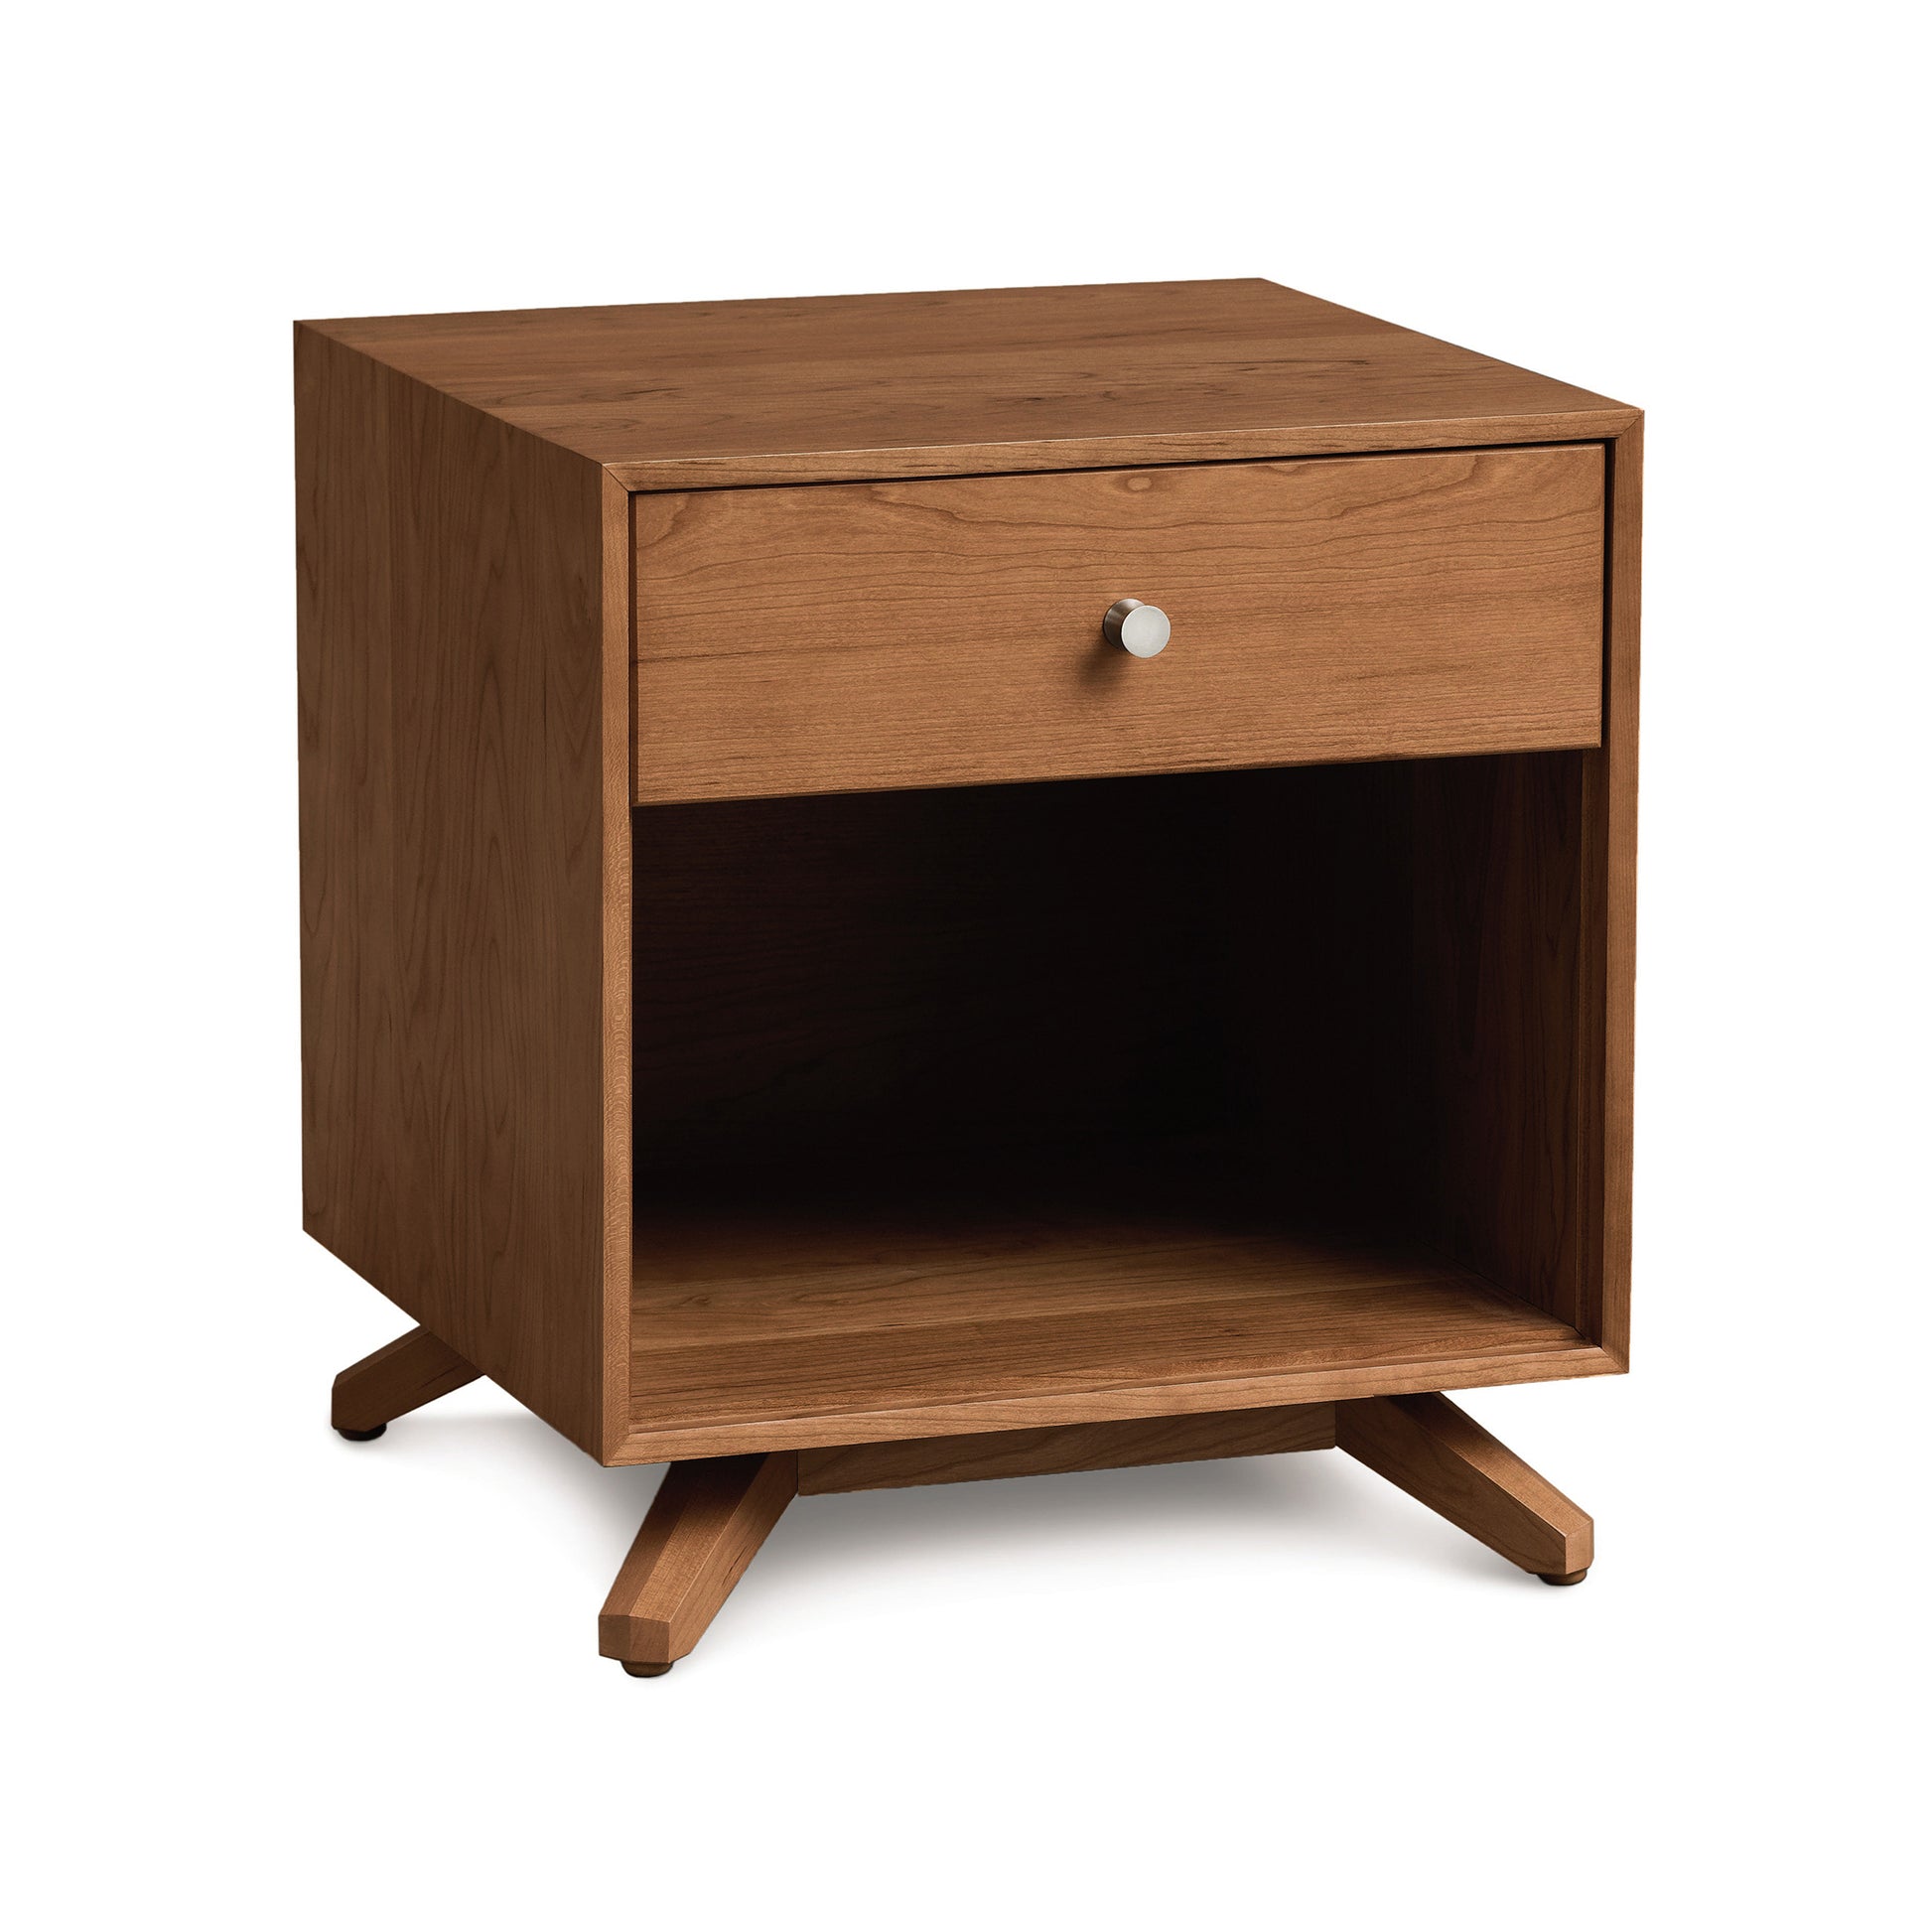 A modern American design Astrid 1-Drawer Enclosed Shelf Nightstand crafted from sustainable hardwood, featuring a single drawer and an open shelf, set against a white background. Made by Copeland Furniture.